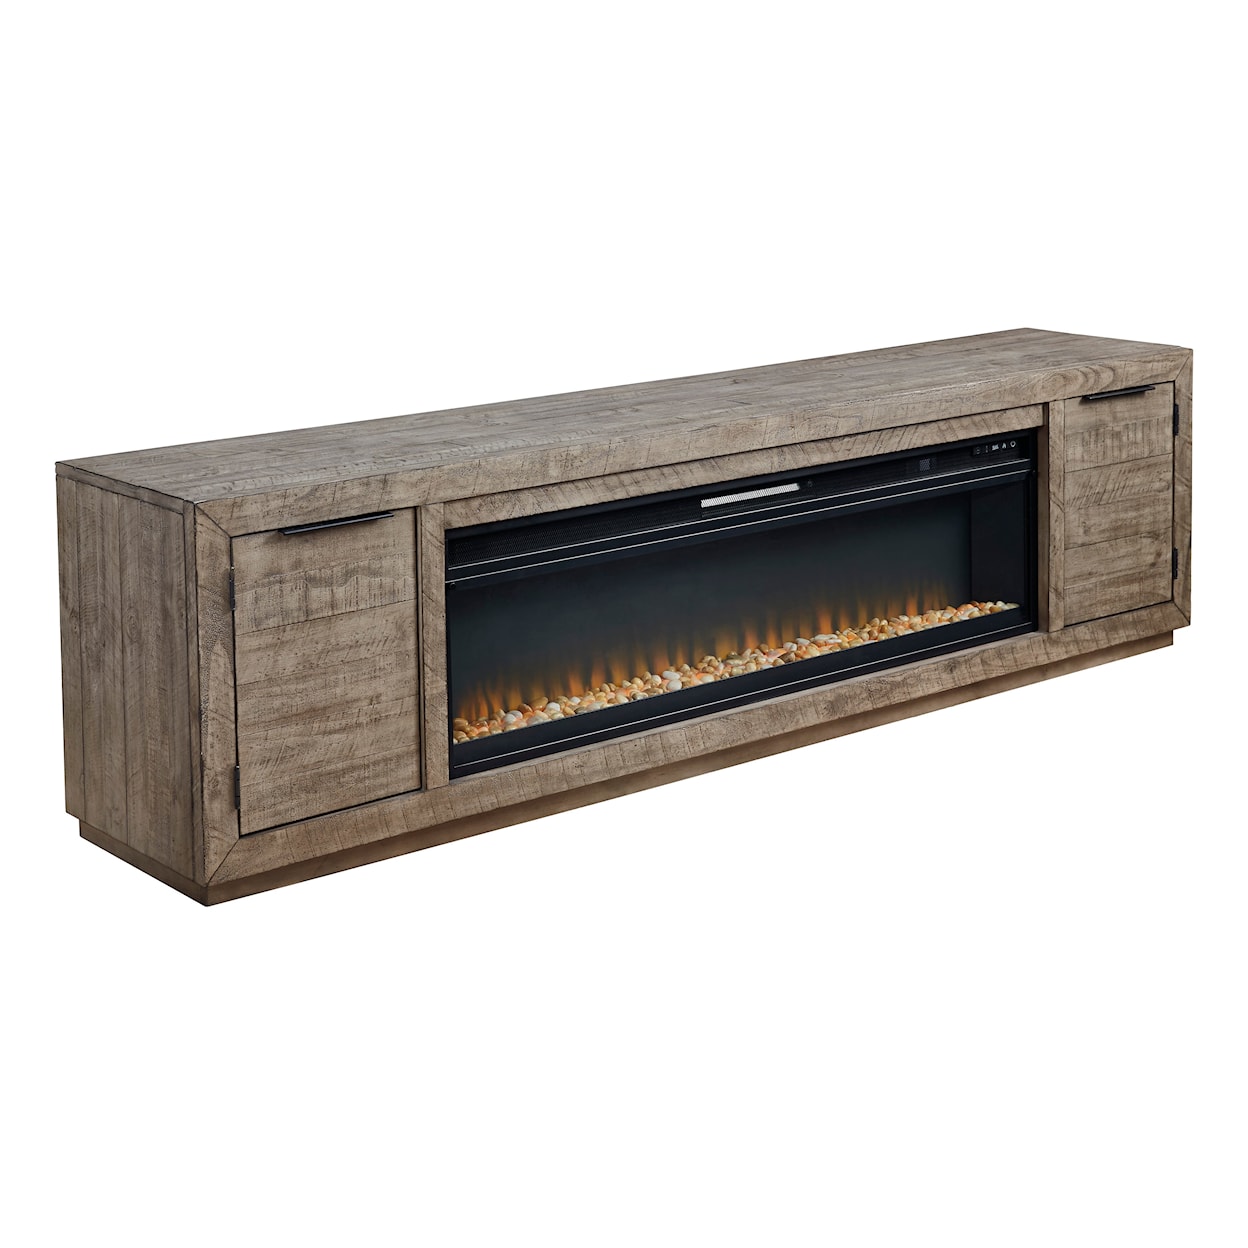 Signature Design Krystanza TV Stand with Electric Fireplace